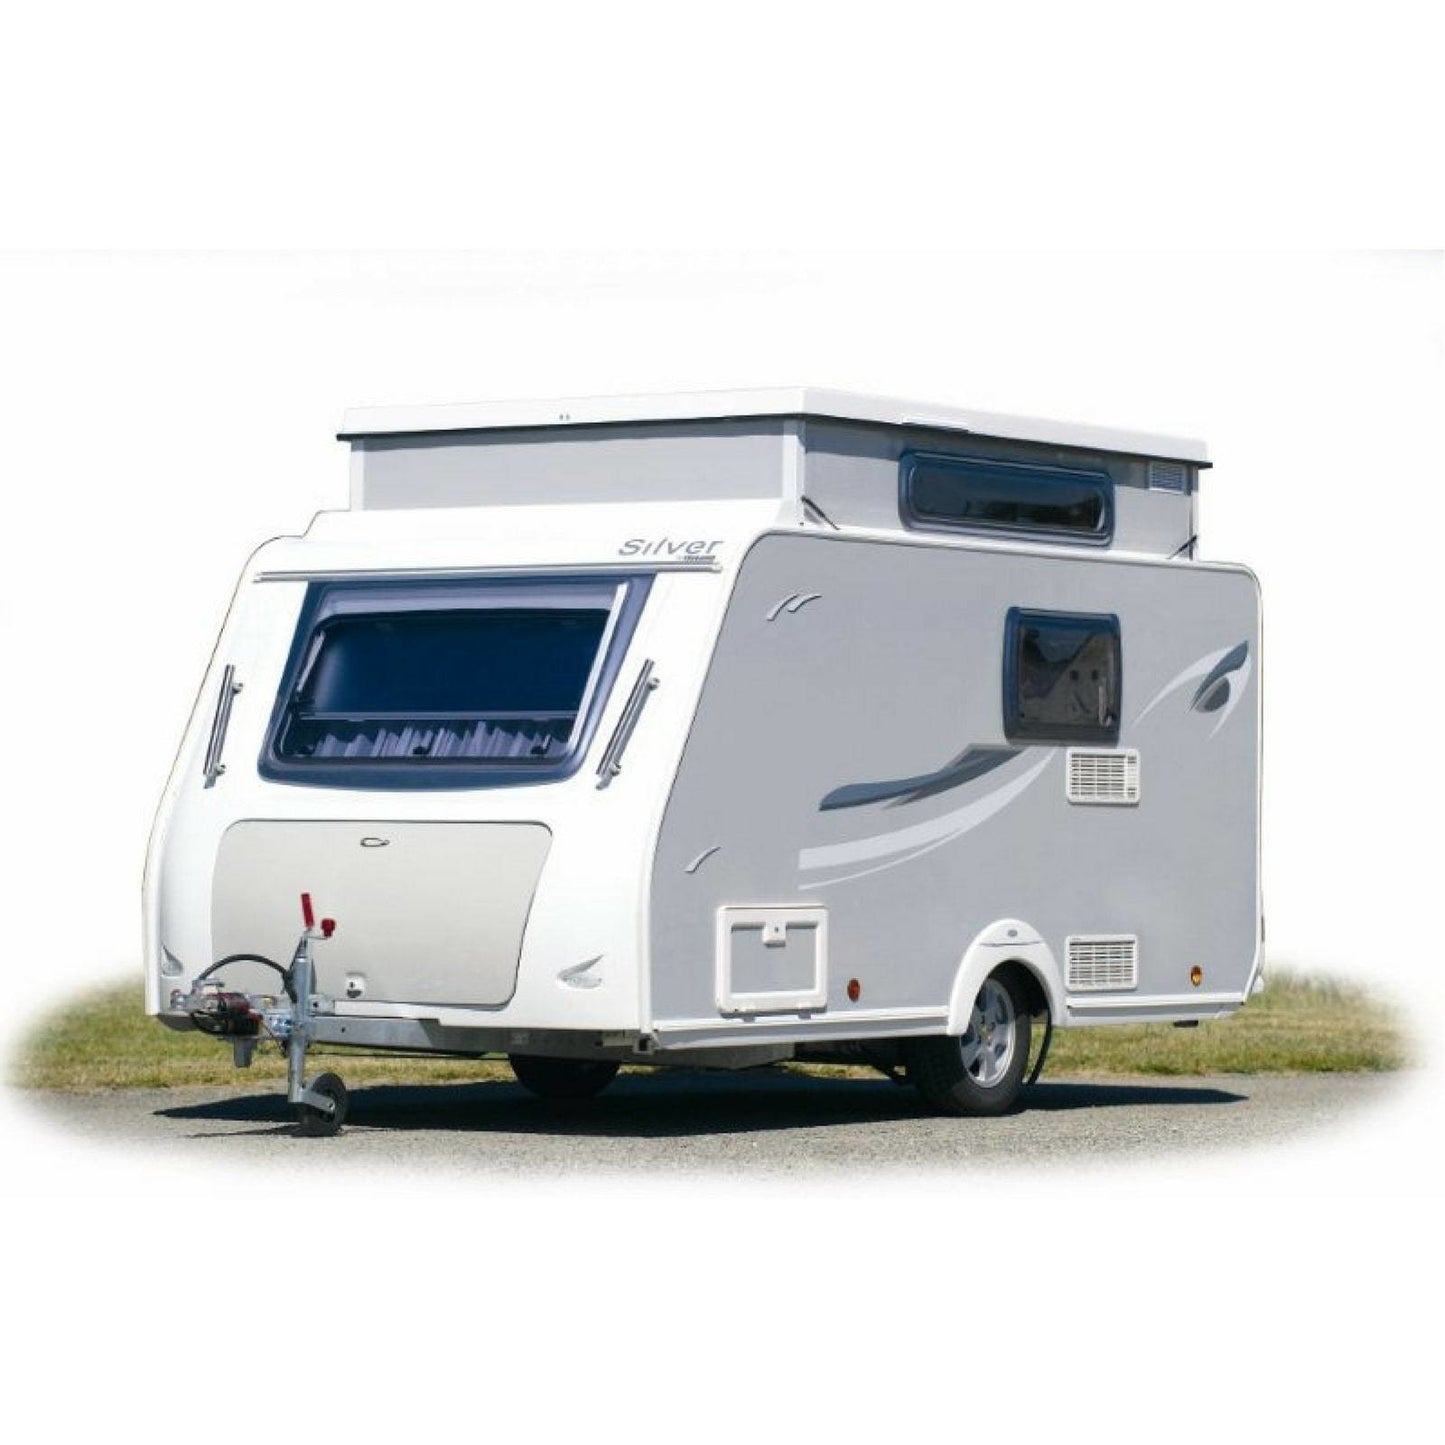 WALKER Weekender for Trigano Silver (2018) + Free Storm Straps - Quality Caravan Awnings